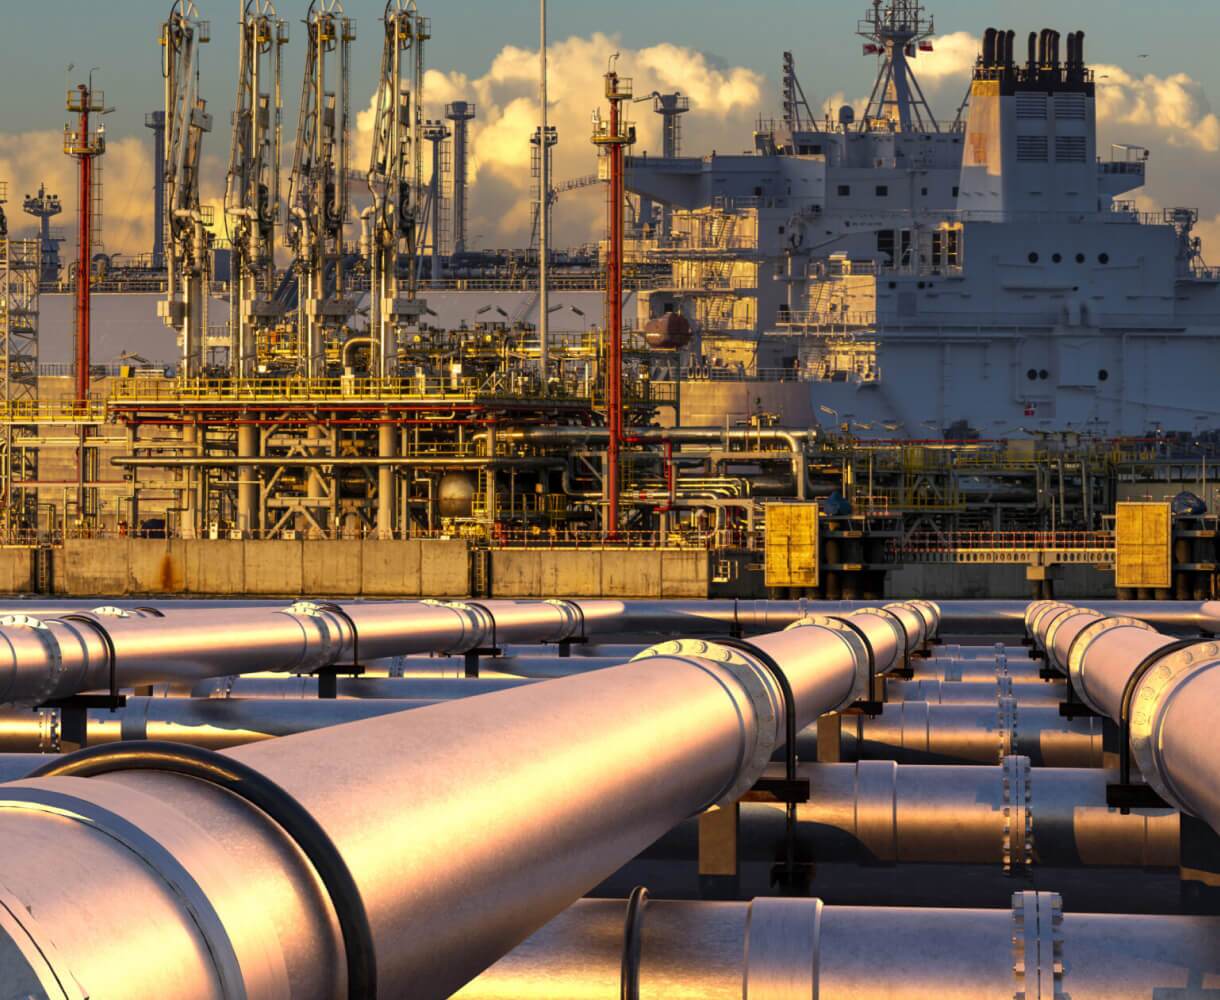 A panoramic view of an industrial complex with pipelines and refinery structures at sunset.